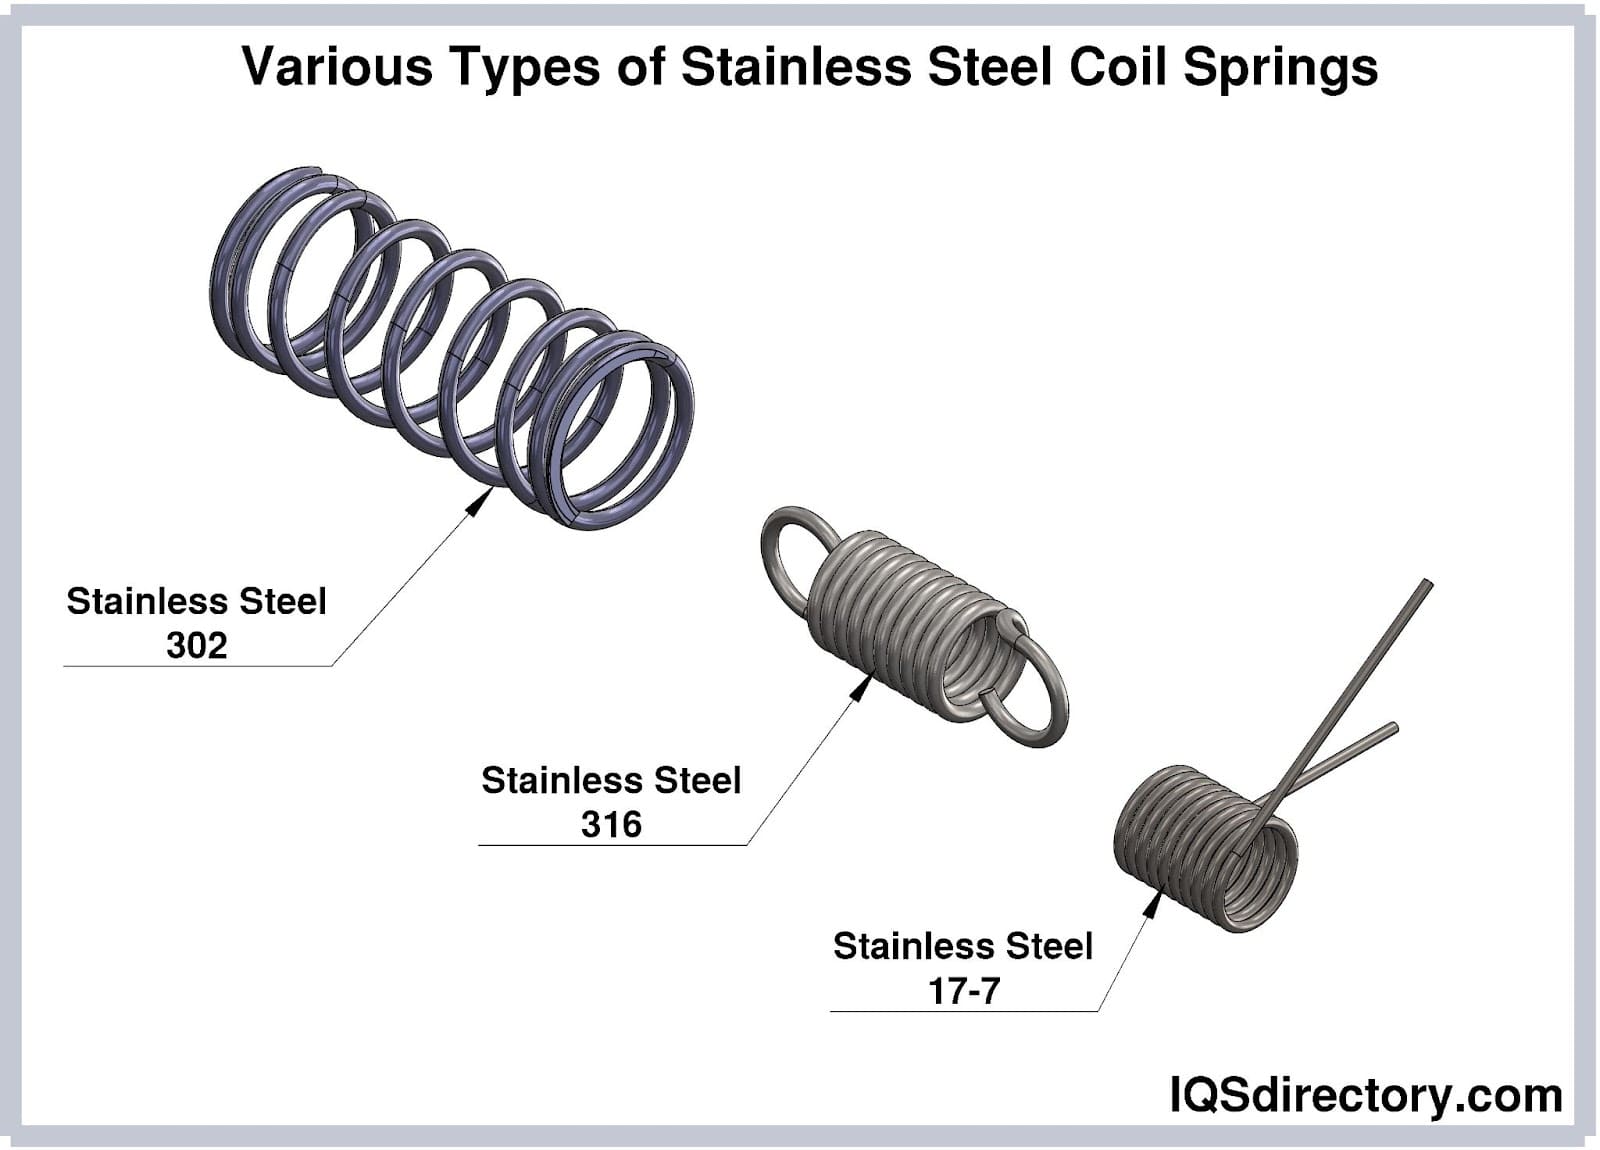 Various Types of Stainless Steel Coil Springs